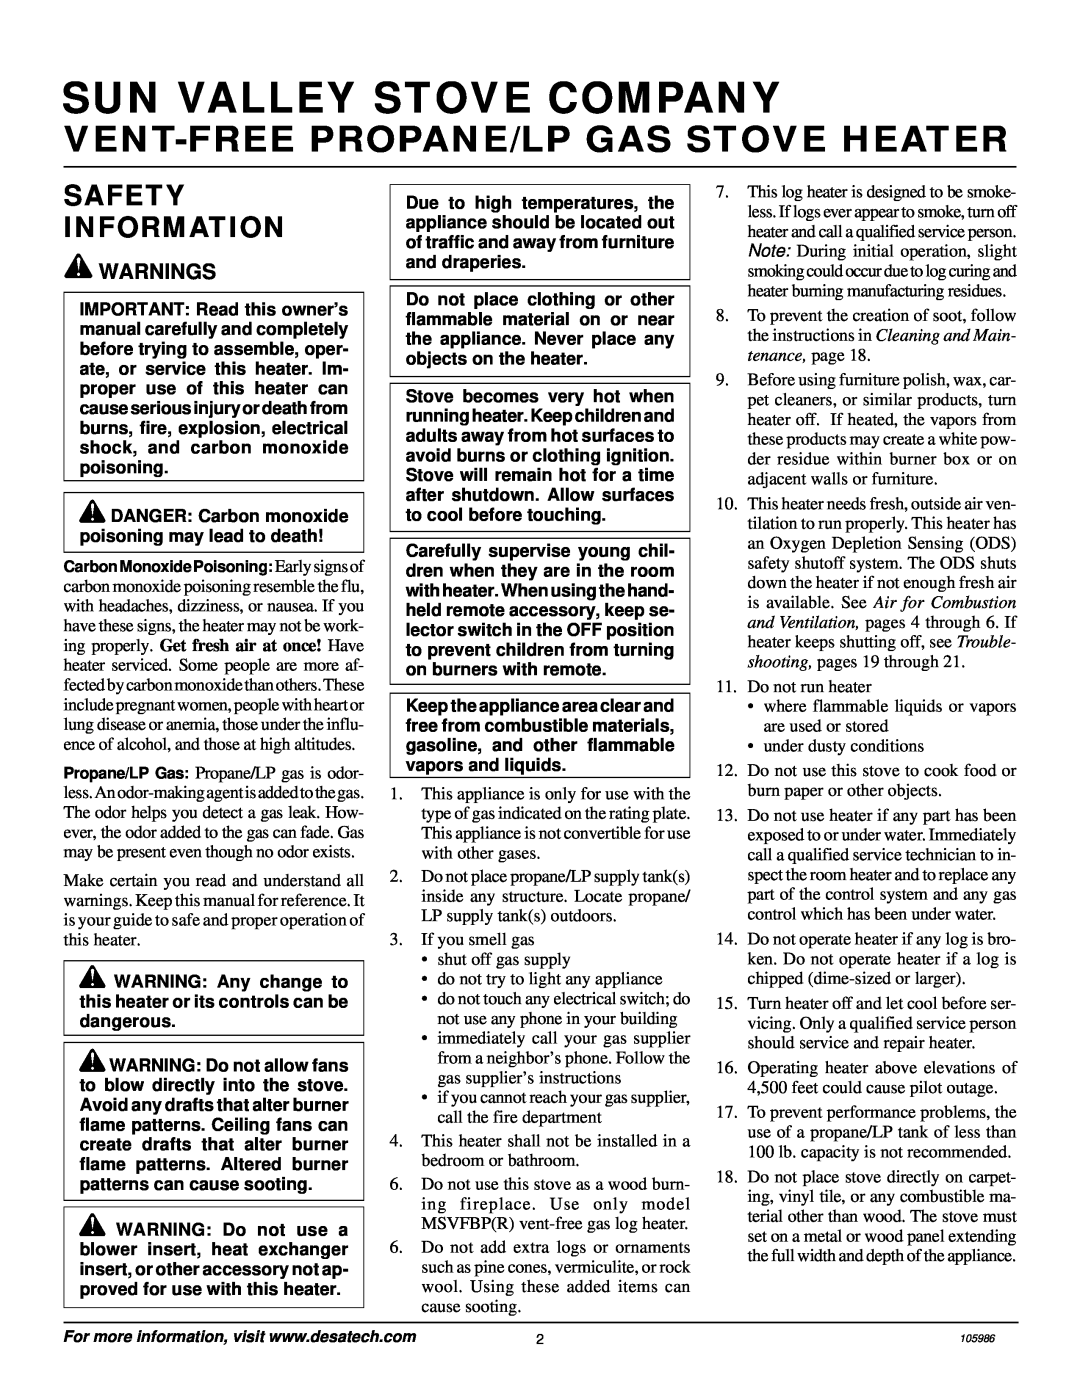 Desa MSVFBP Sun Valley Stove Company, Safety Information, Warnings, Vent-Freepropane/Lp Gas Stove Heater 